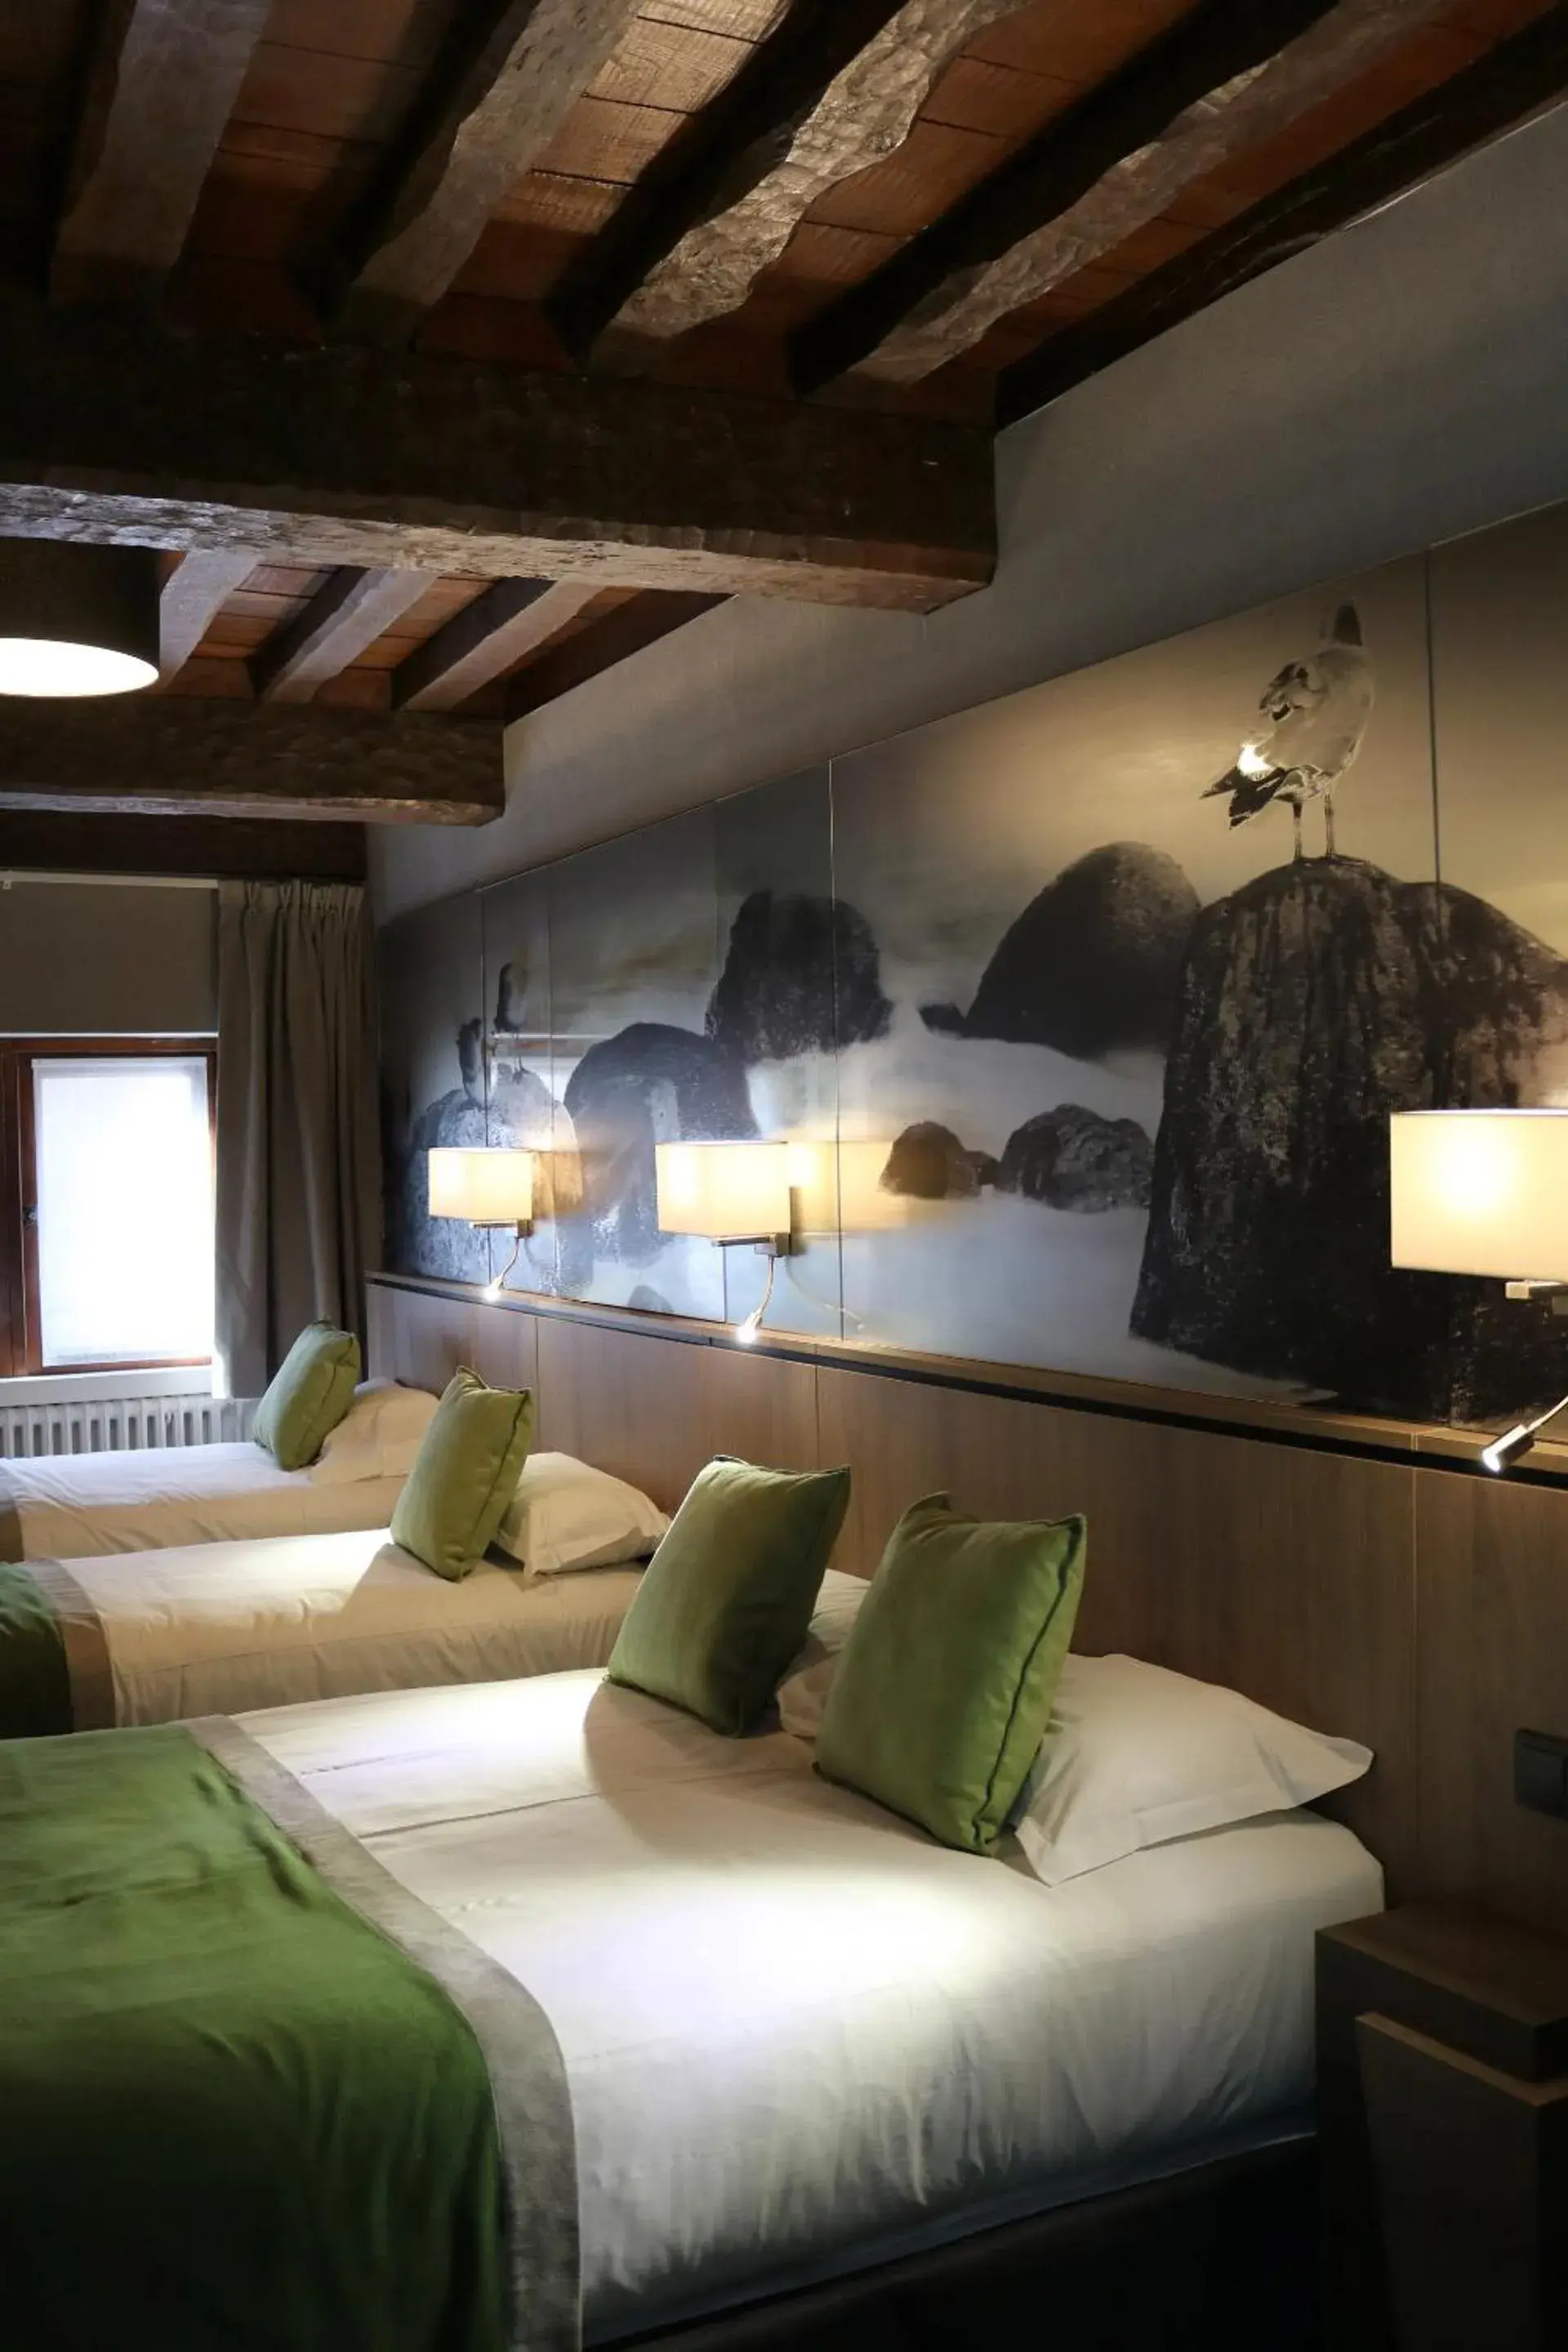 Bedroom in Le Mouton Blanc